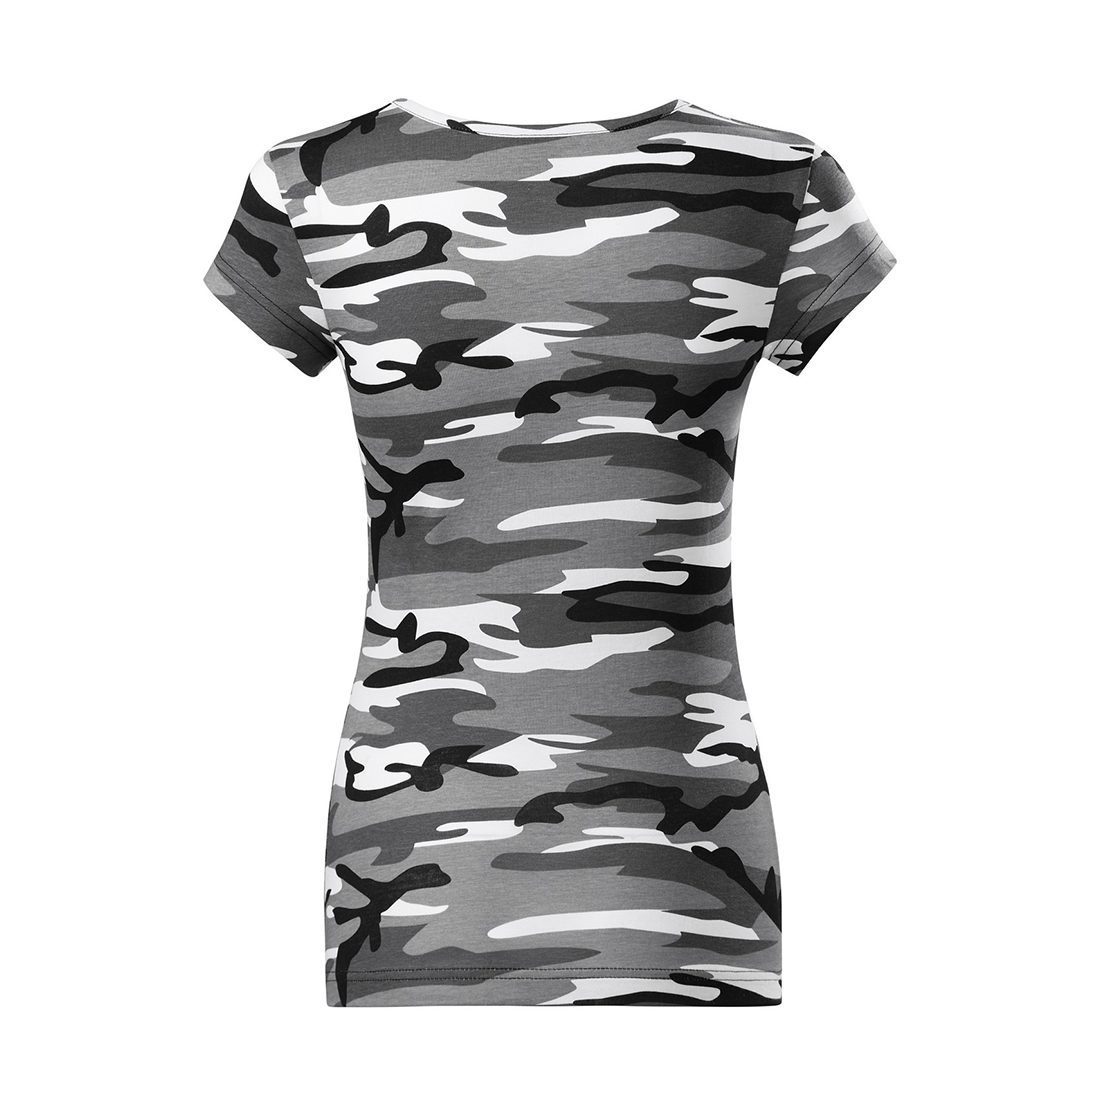 Women's T-shirt with silicon finish - Safetywear